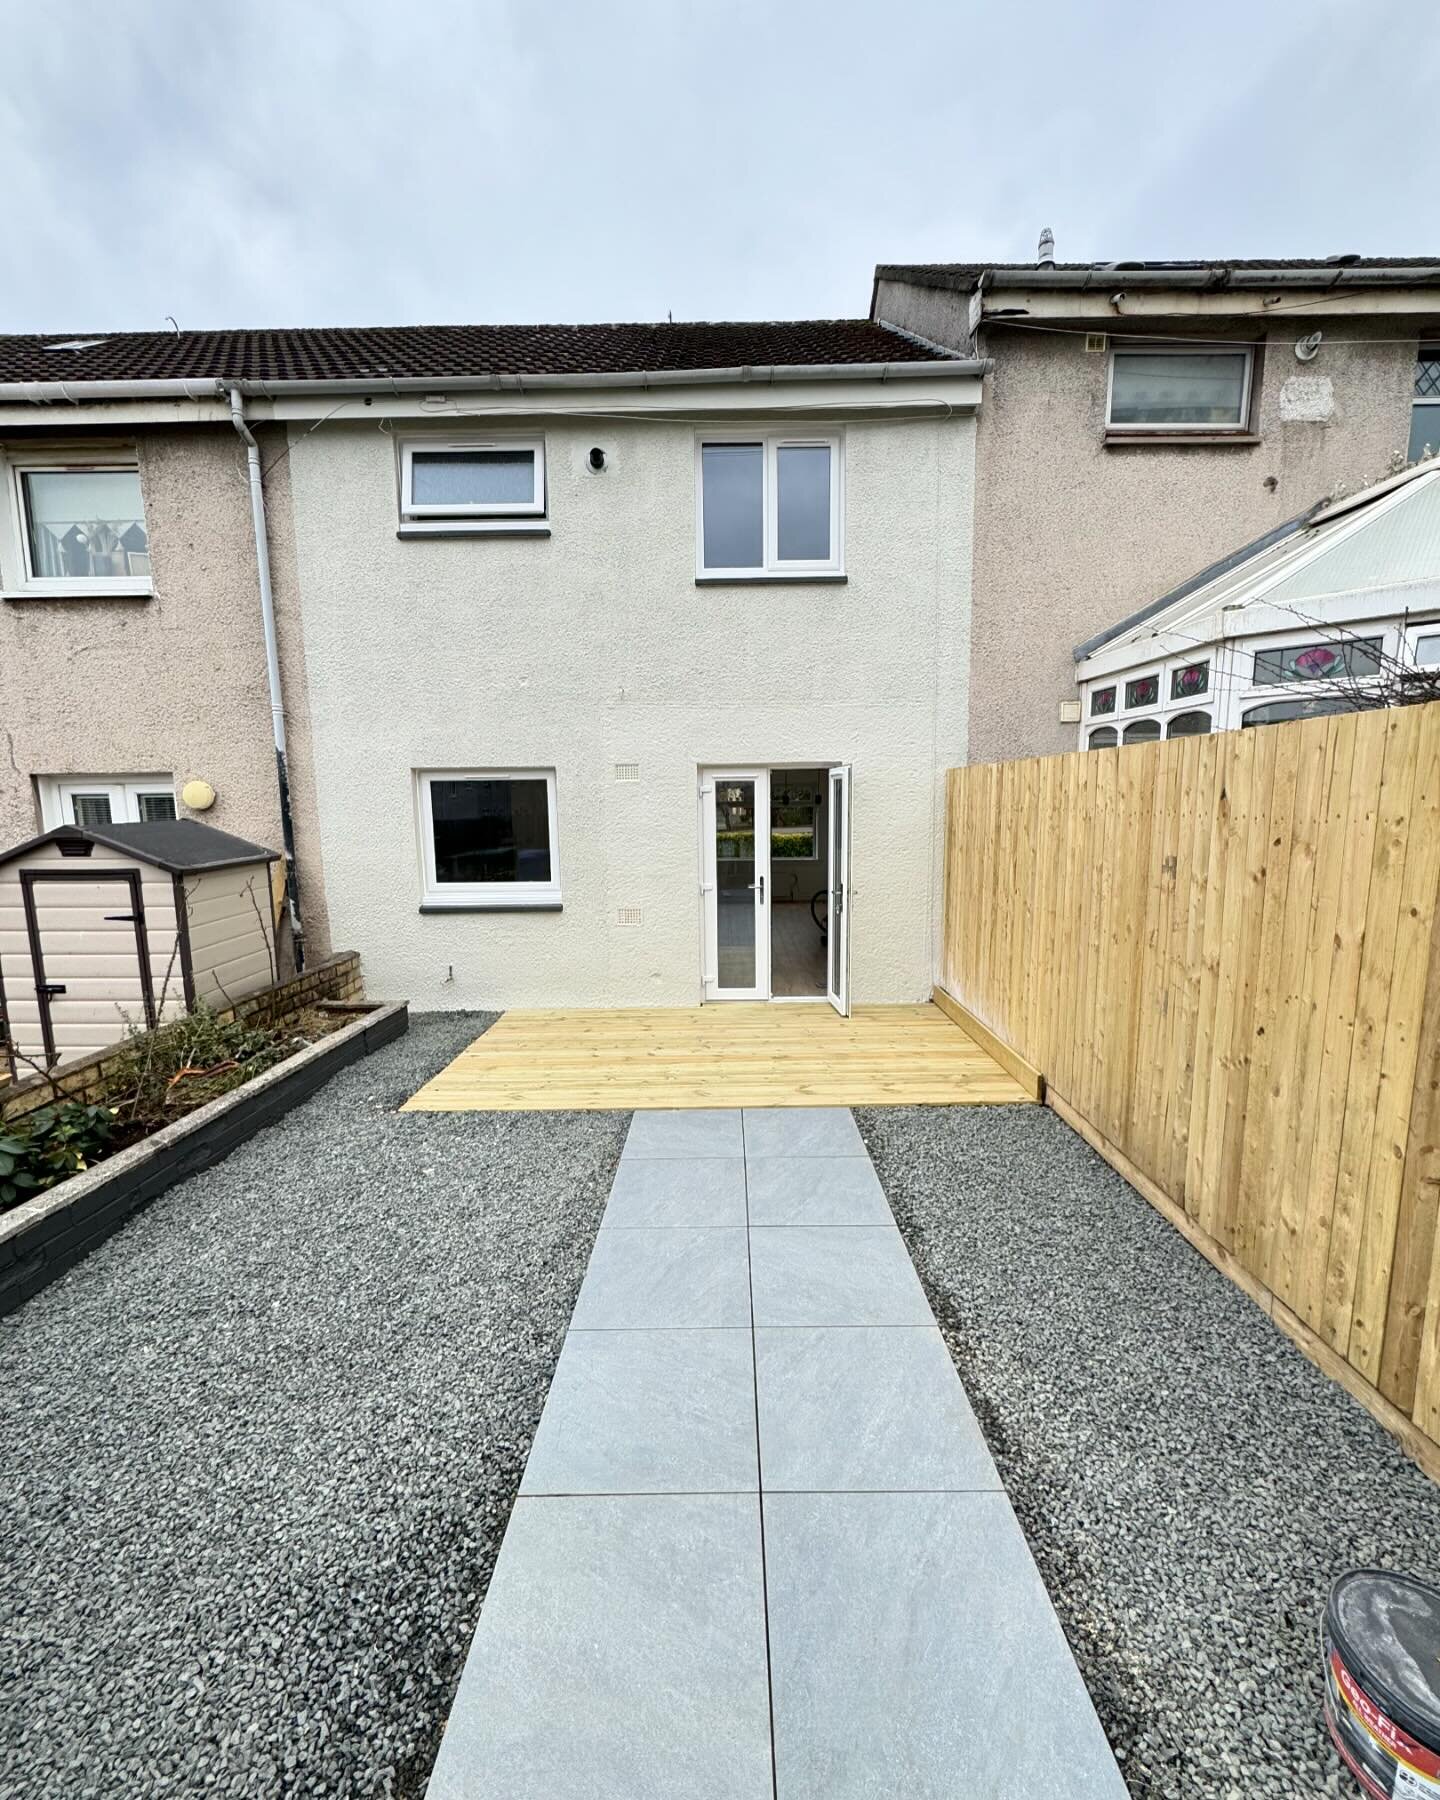 Back garden complete!

Another major step to getting this on the market, finishing the back garden, what a difference. This house is truly walk in condition, absolutely nothing required at all other than move your furniture in and personalize with de